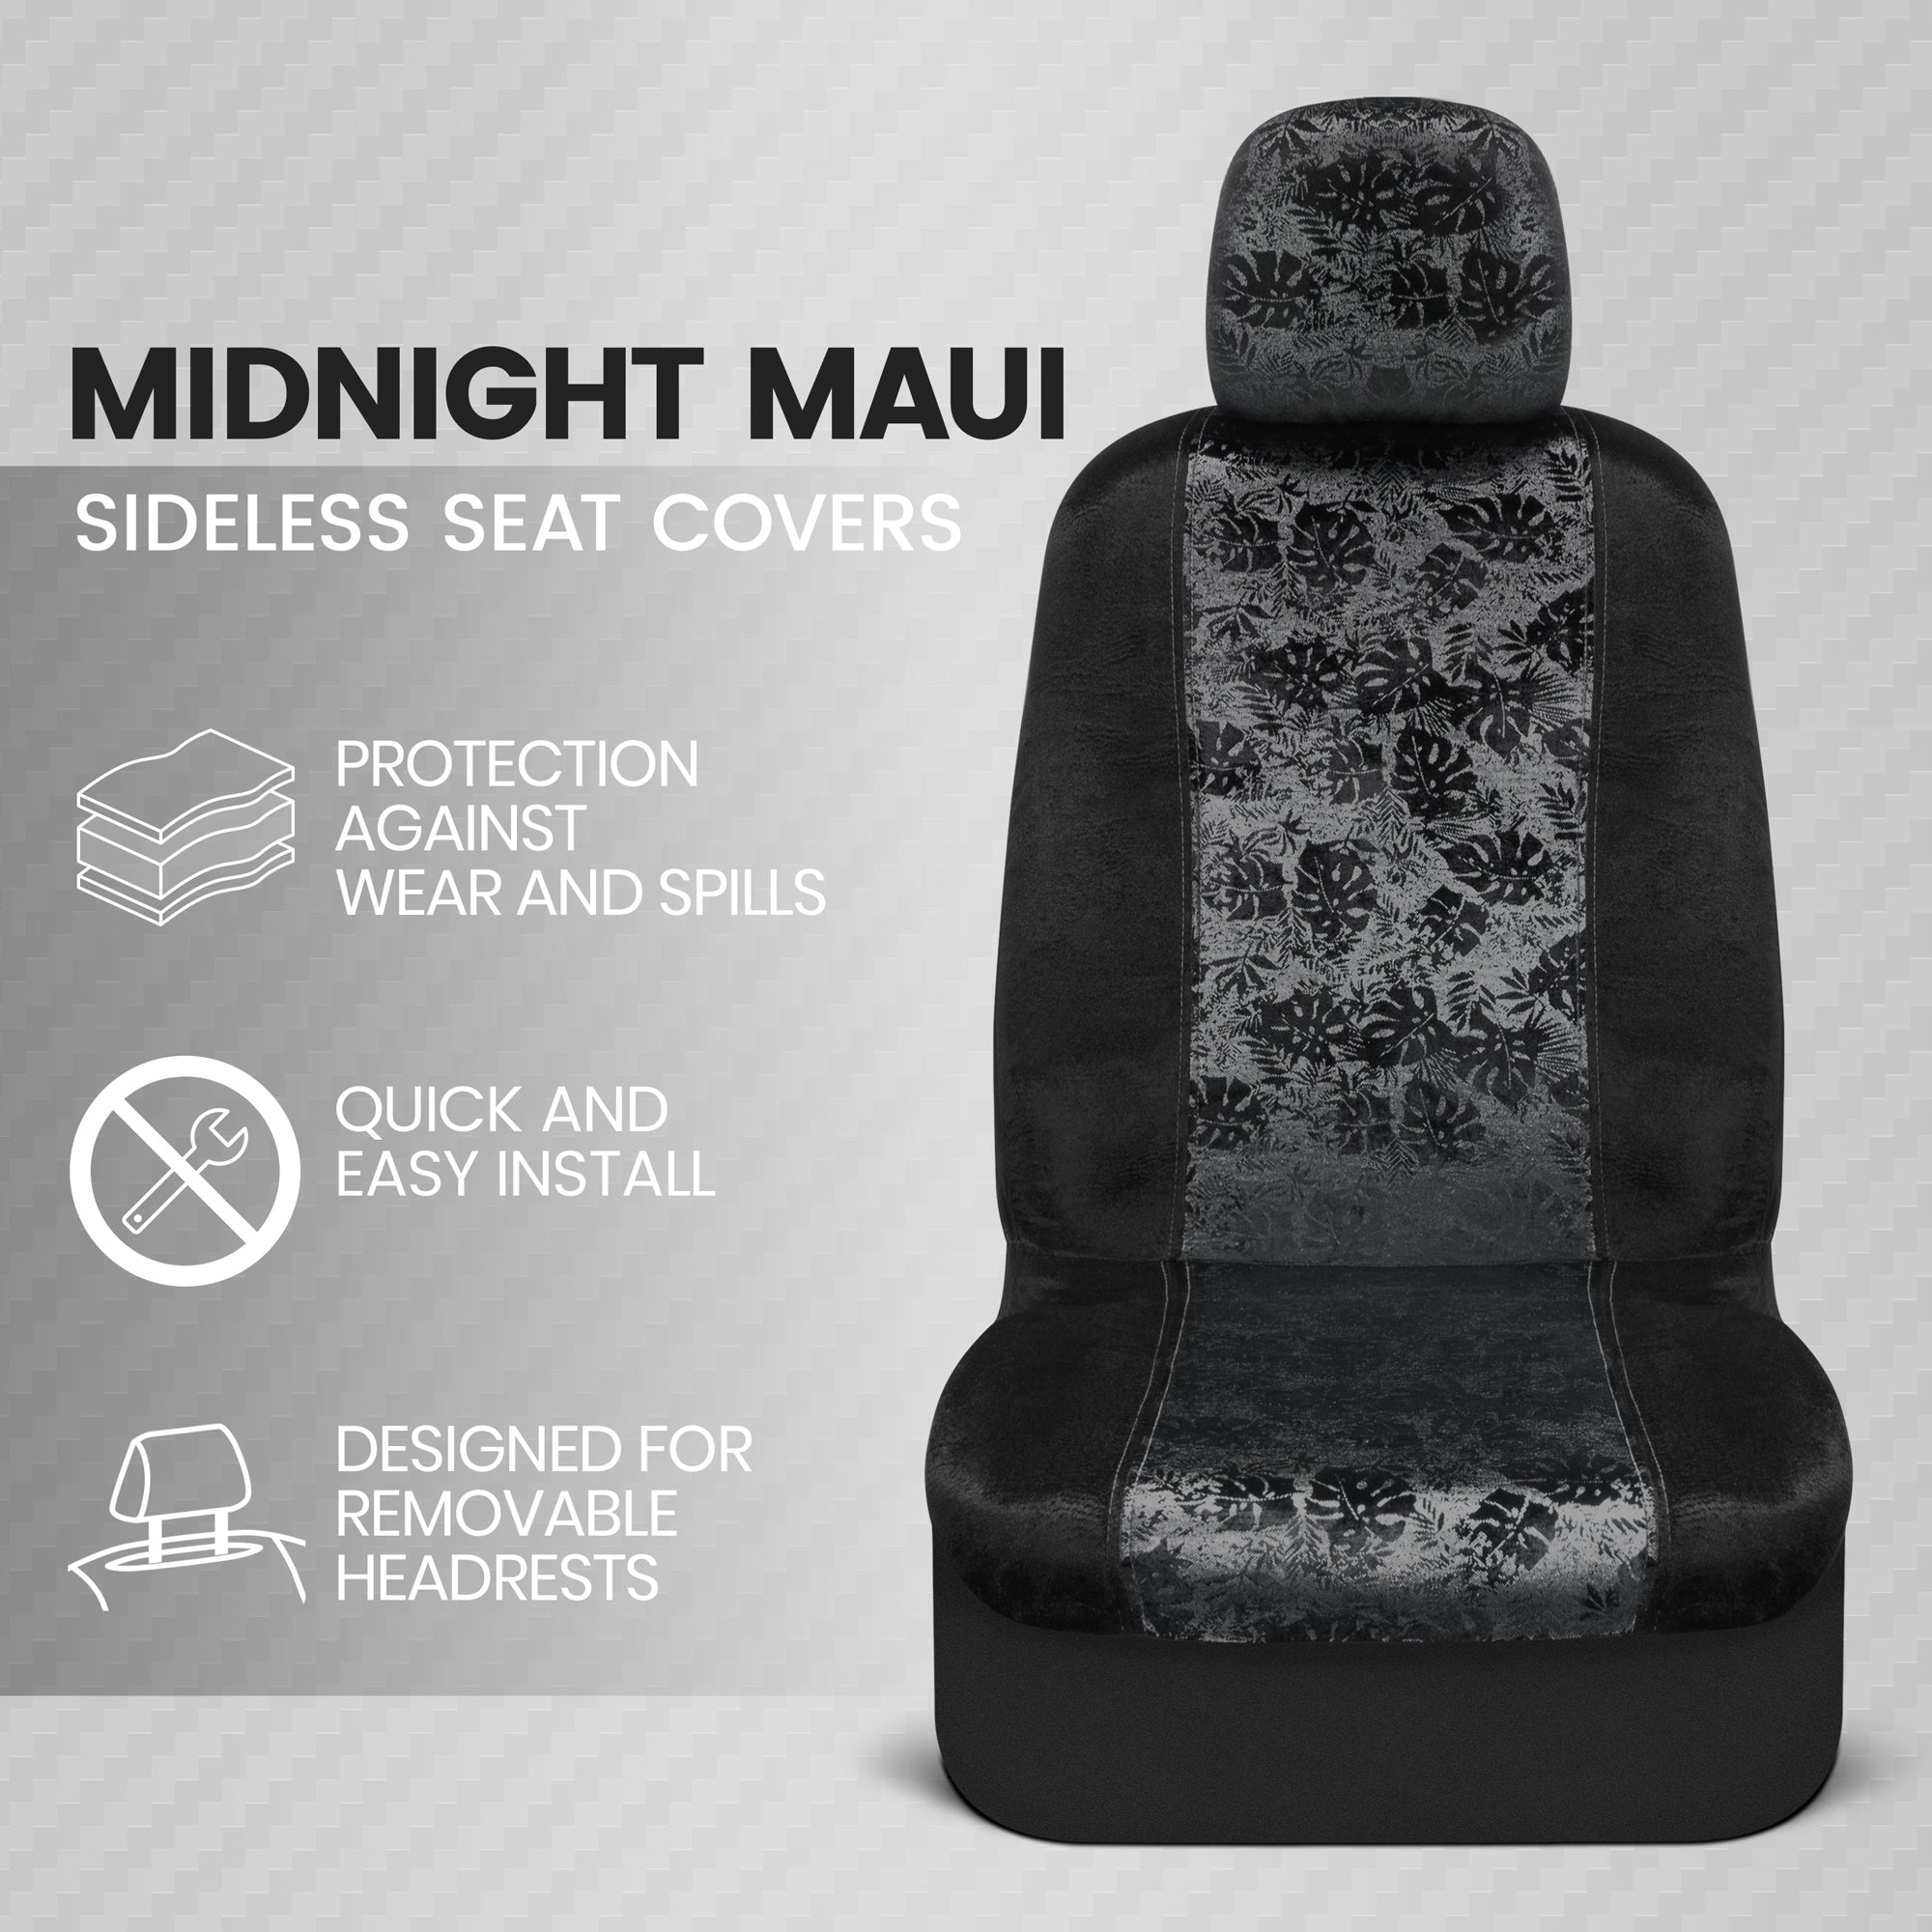 BDK Black Maui Car Seat Covers for Front Seats, 2 Pack – Tropical Pattern Front Seat Cover Set with Matching Headrest, Sideless Design for Easy Installation, Fits Most Car Truck Van and SUV